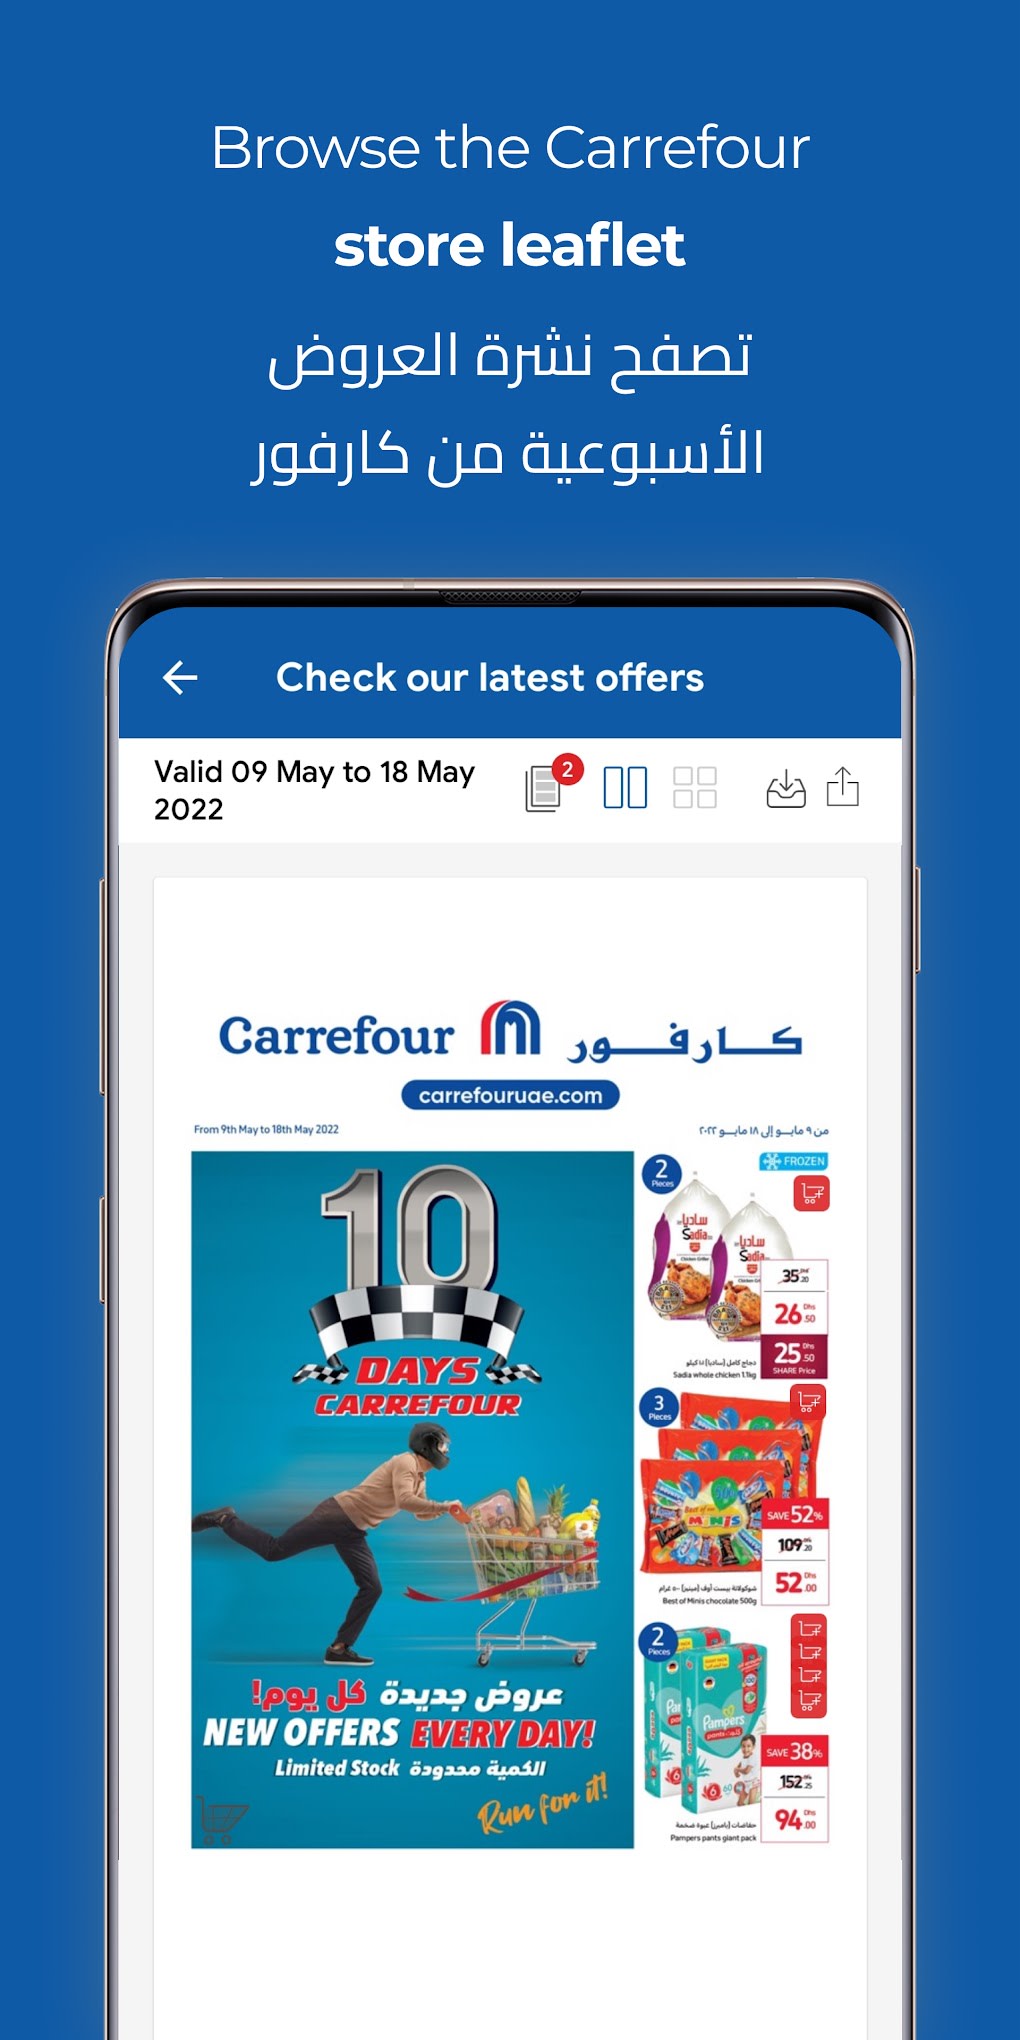 Download MAF Carrefour Online Shopping on PC with MEmu